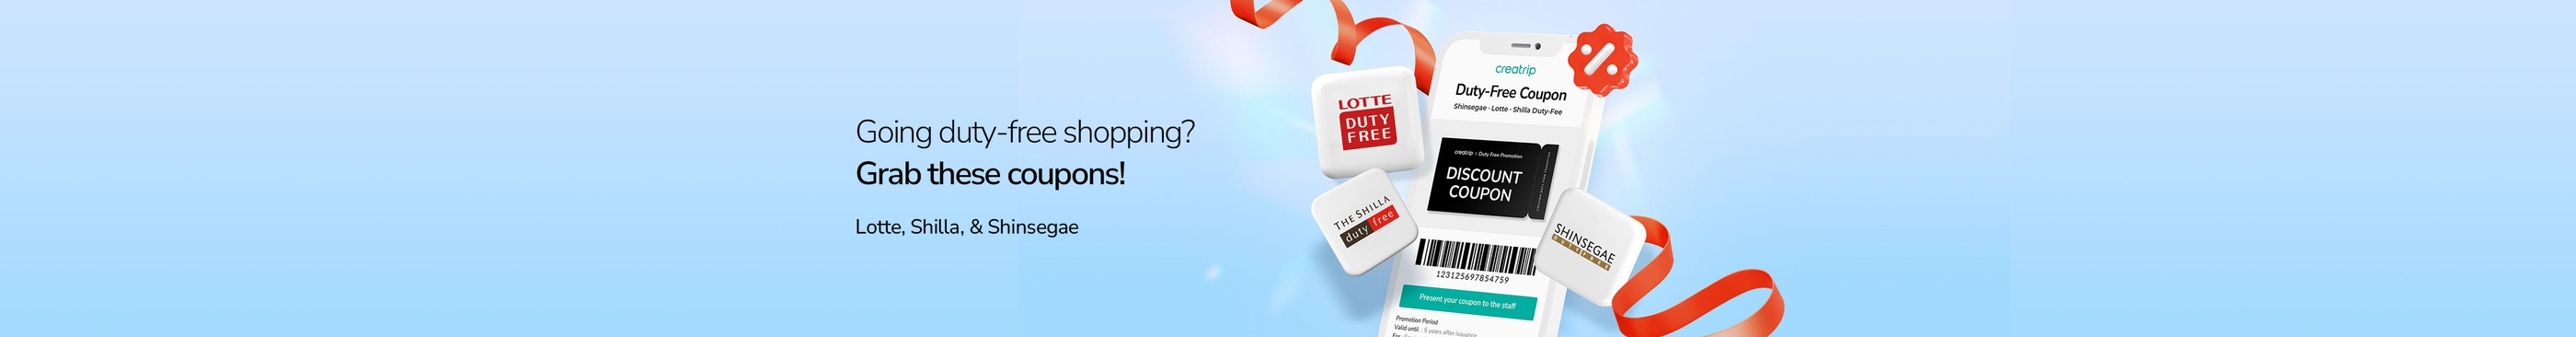 Going duty-free shopping? Grab these coupons!